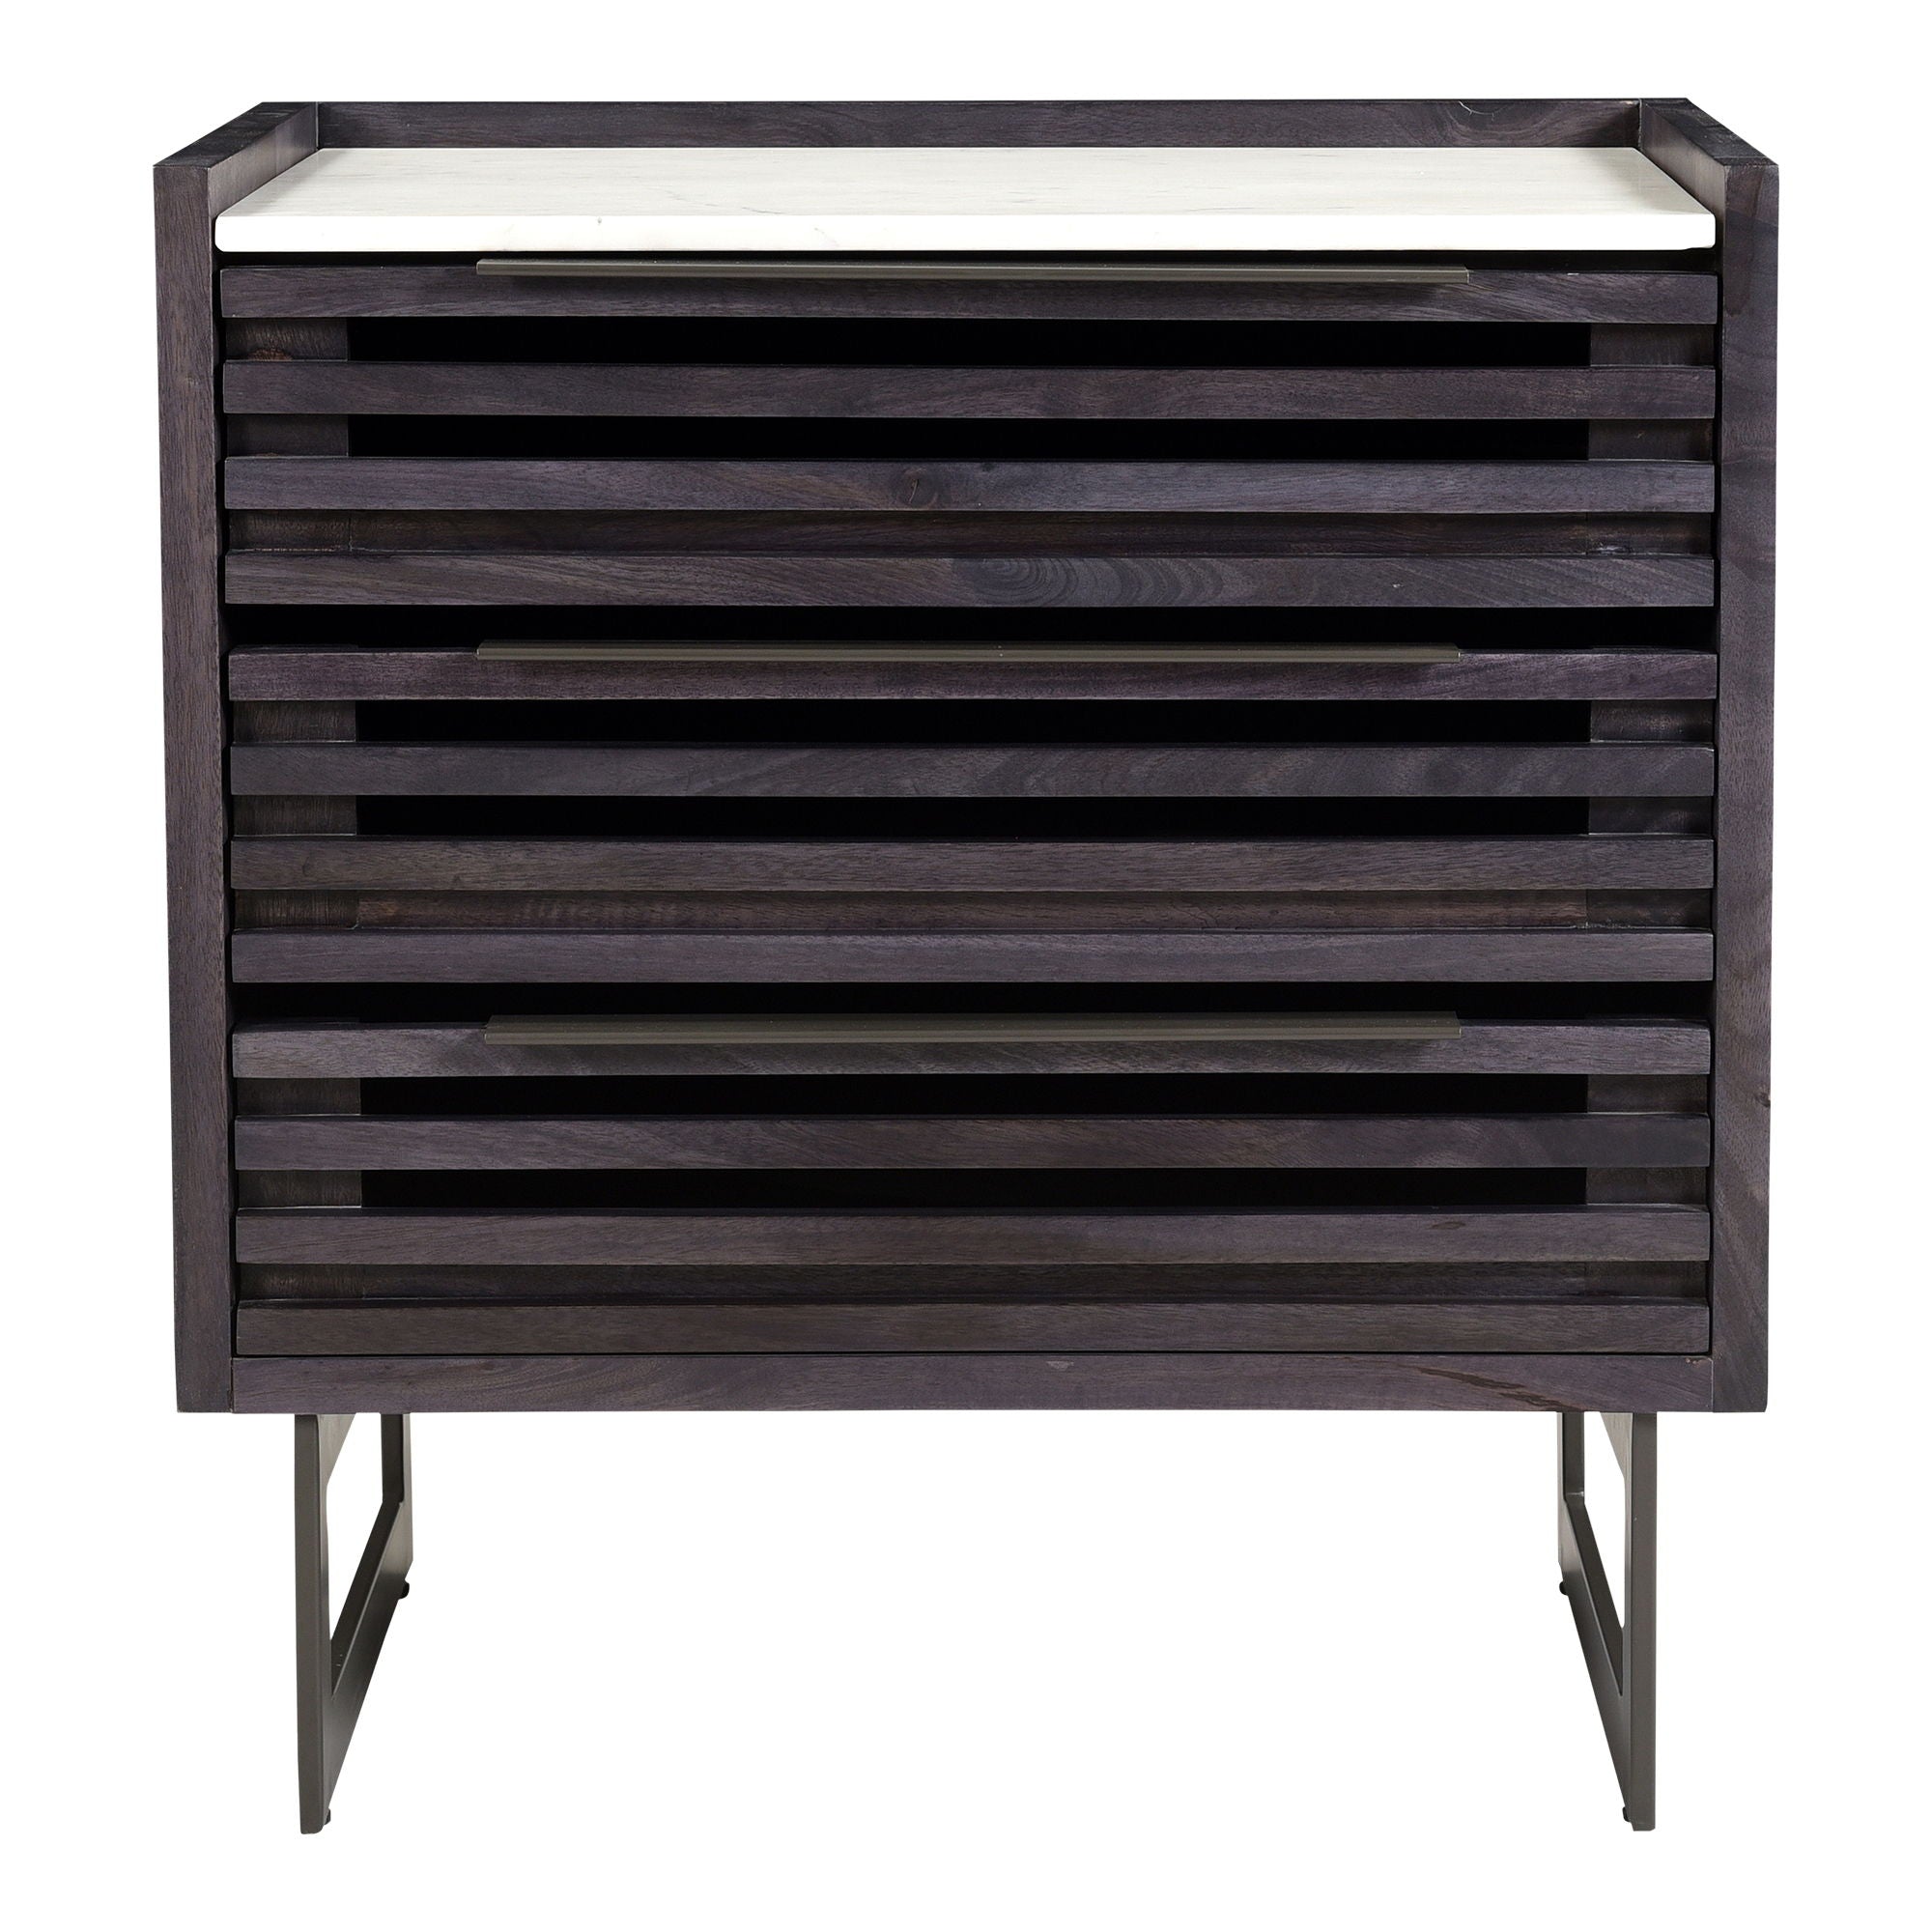 Paloma - 3 Drawer Chest - Brown